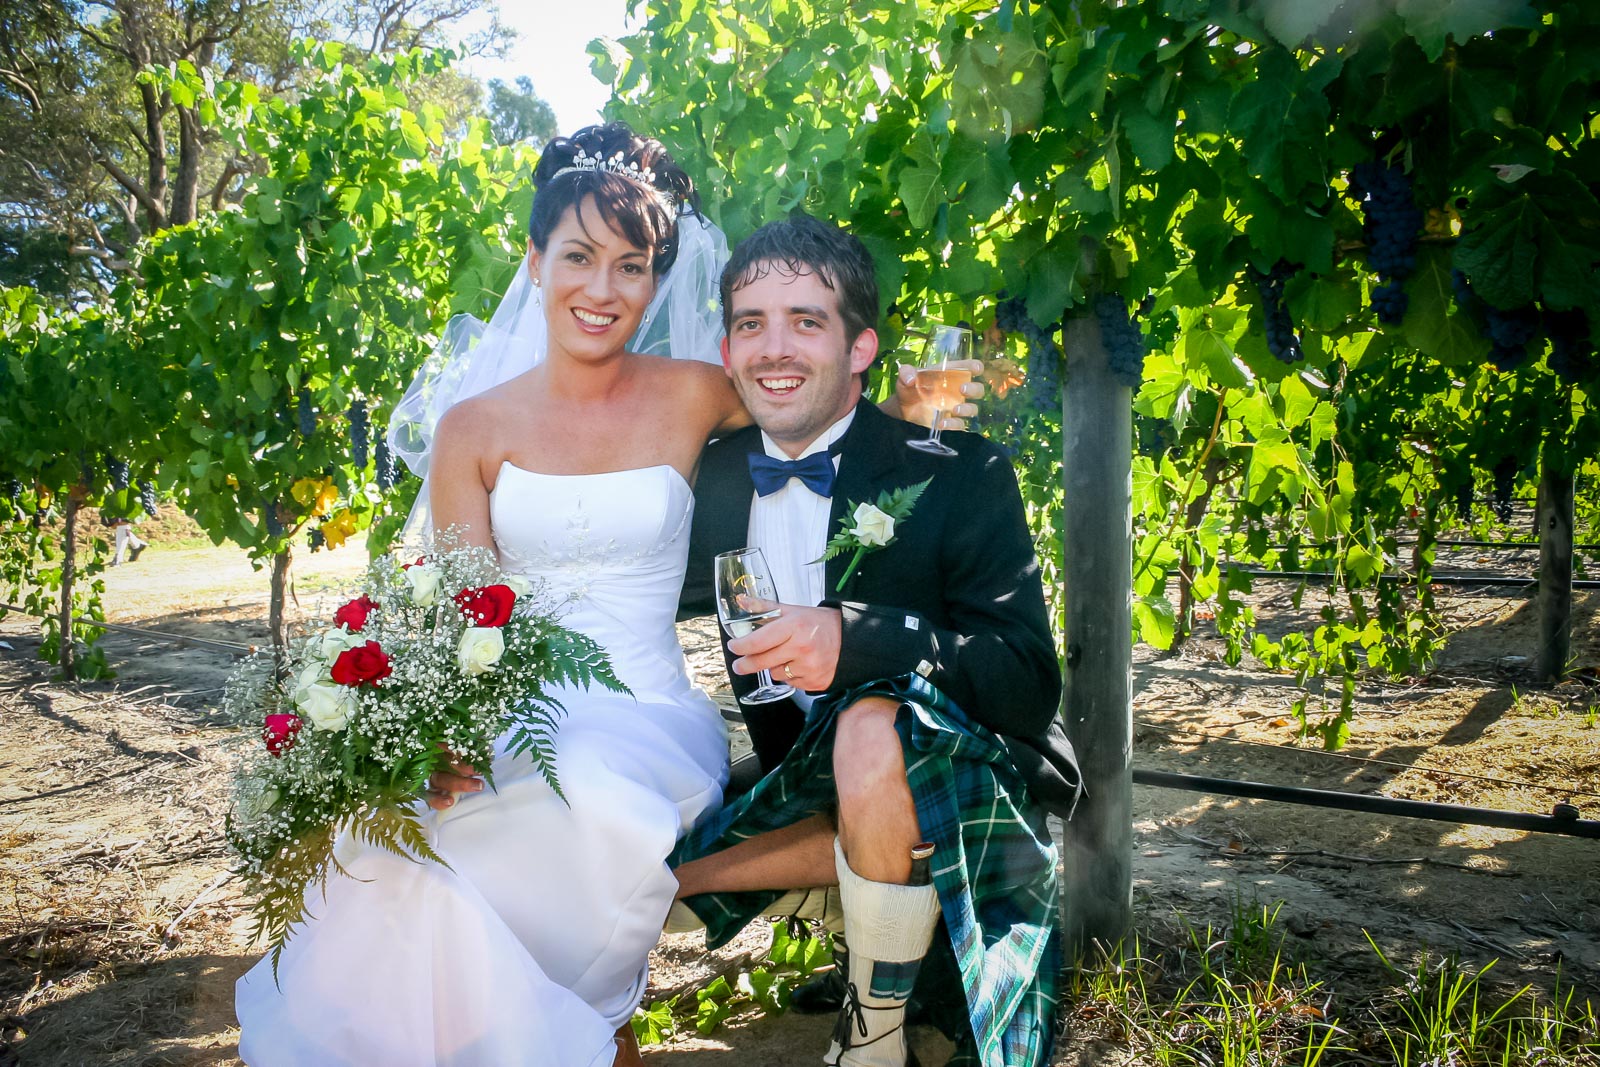 Russ and Megs pose amongst grape vines after their wedding.